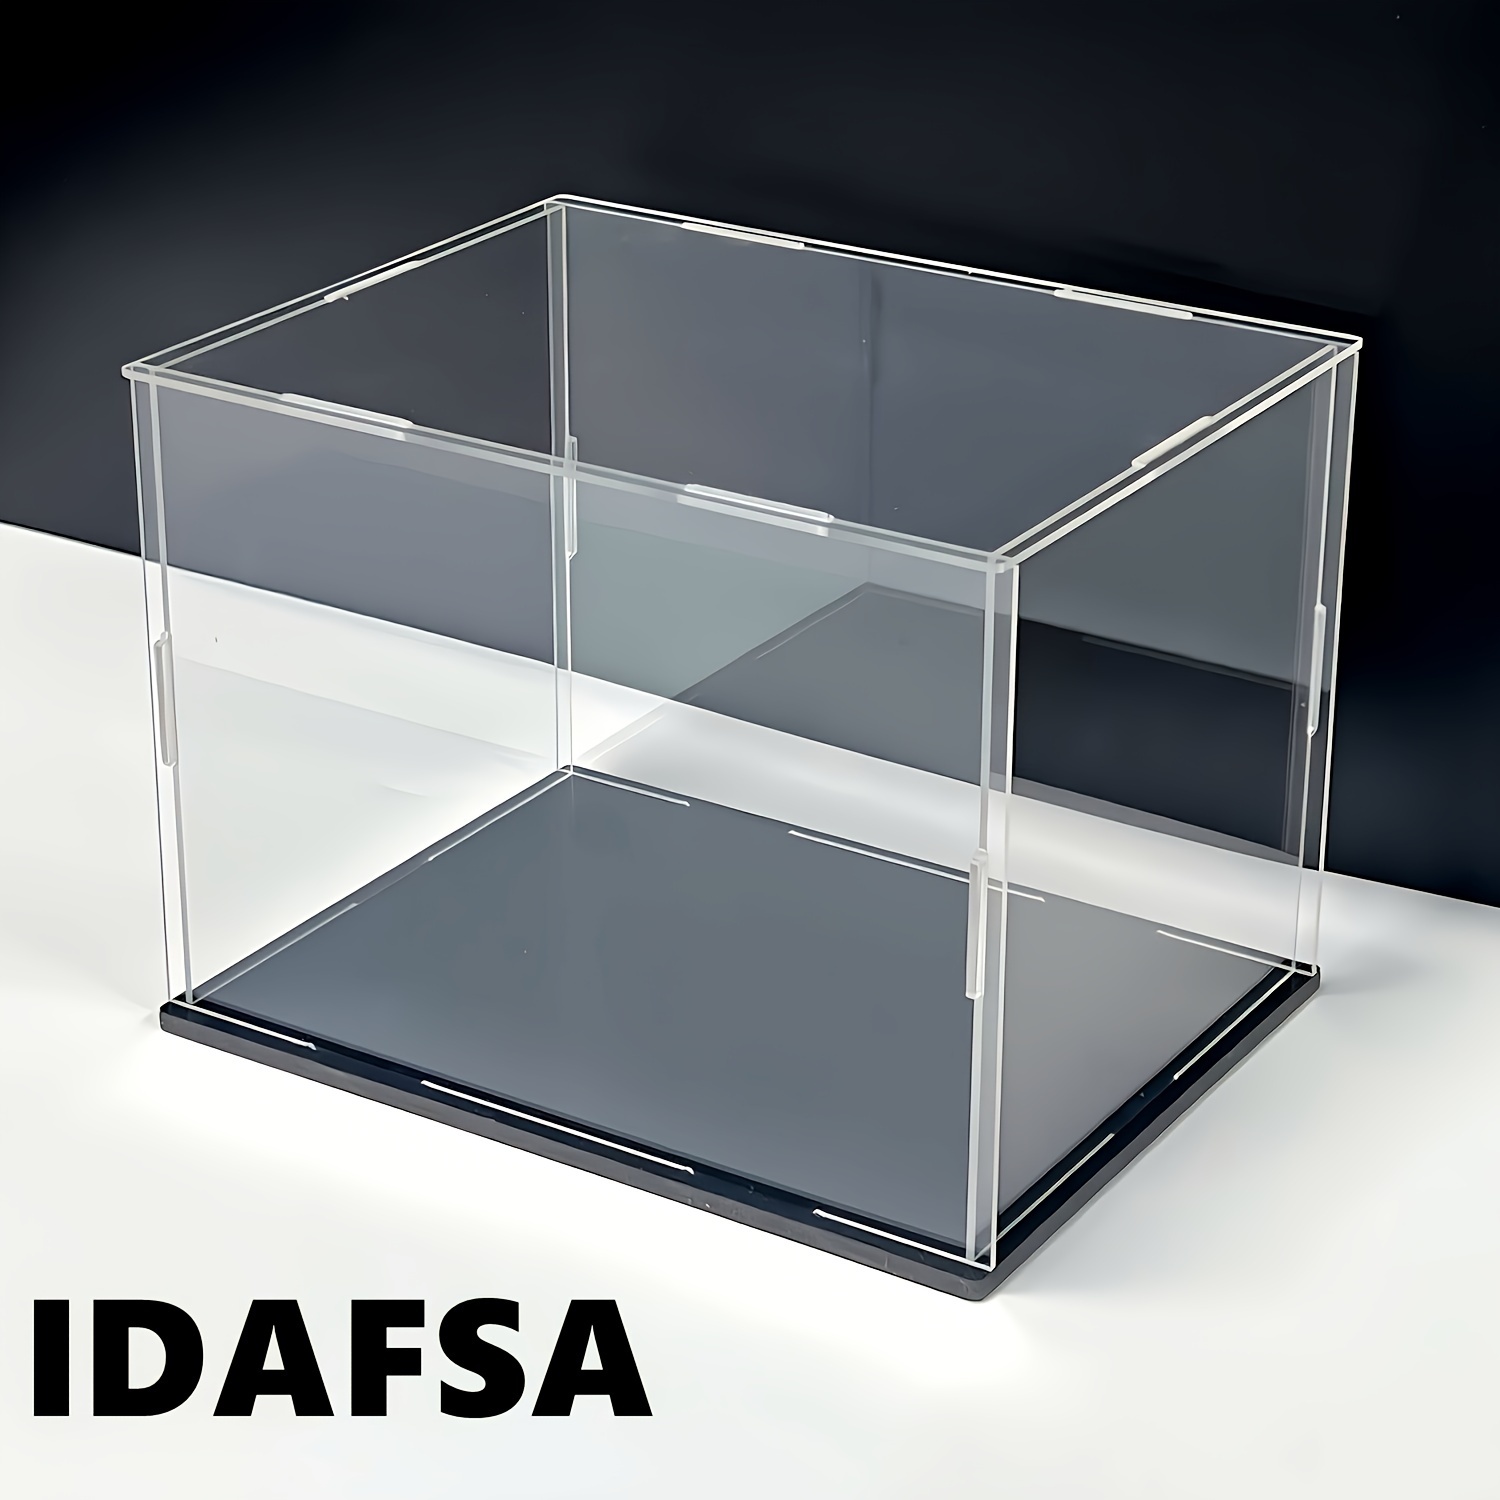 

1pc Protect Your Toy Figurines With This Transparent Display Box Building Block Storage Cabinet!